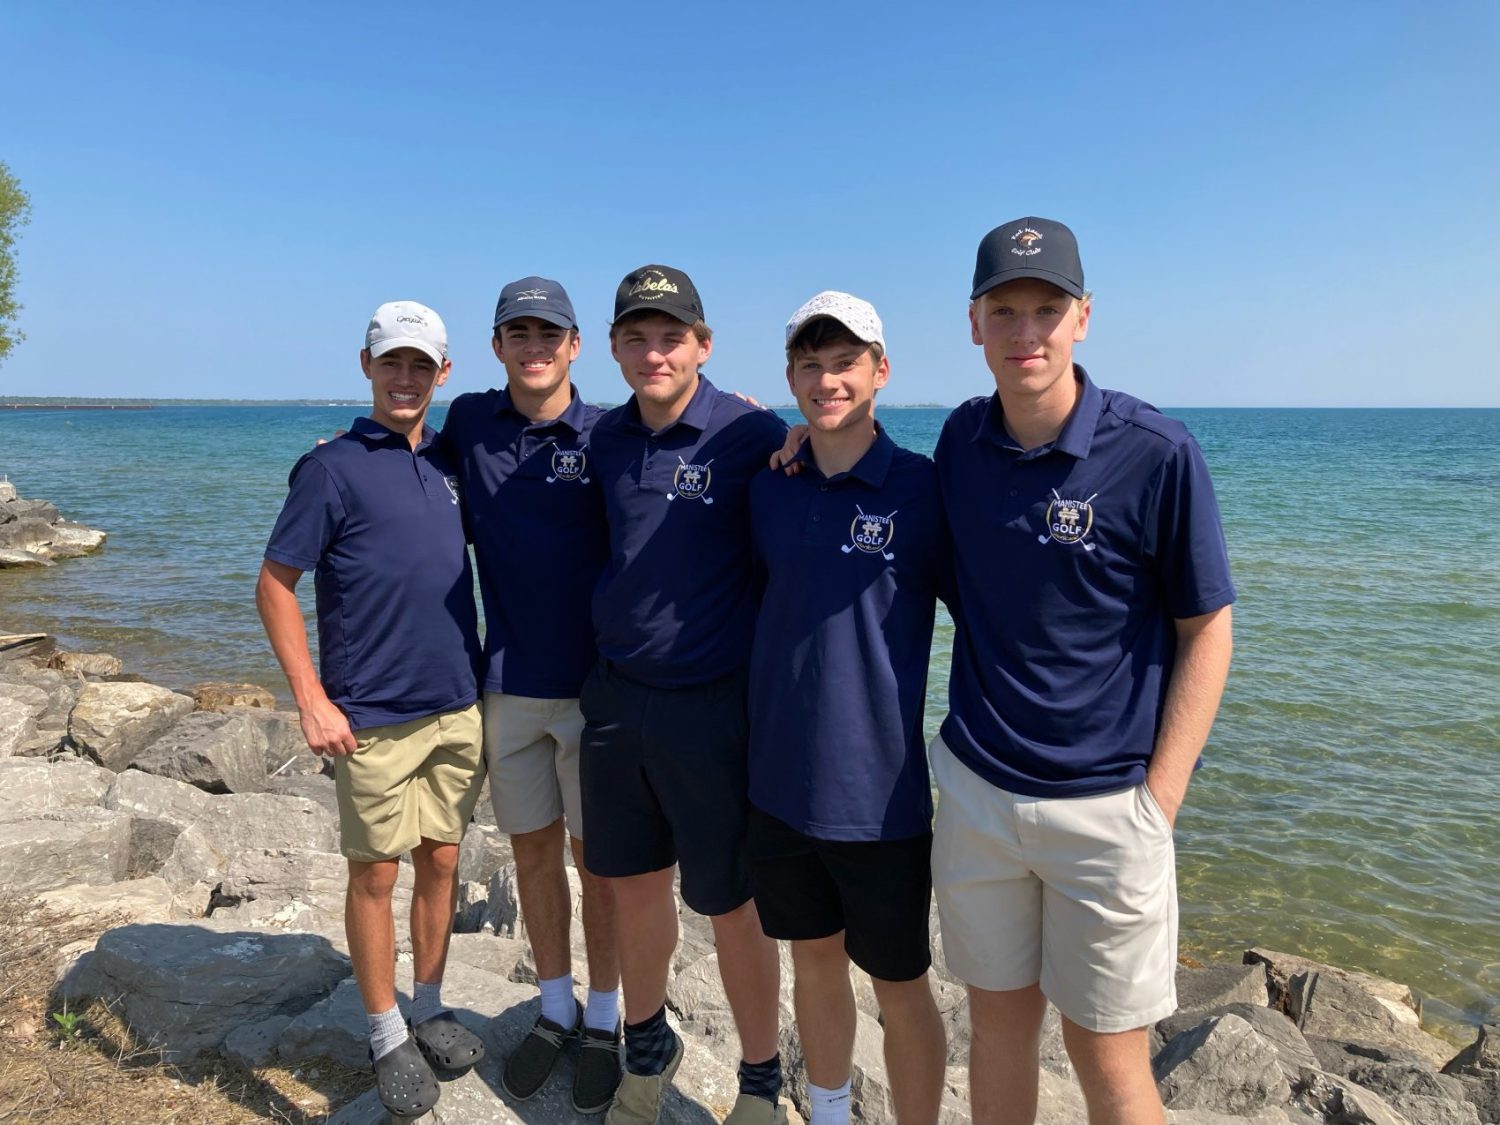 Manistee earns berth in Division 4 golf state finals